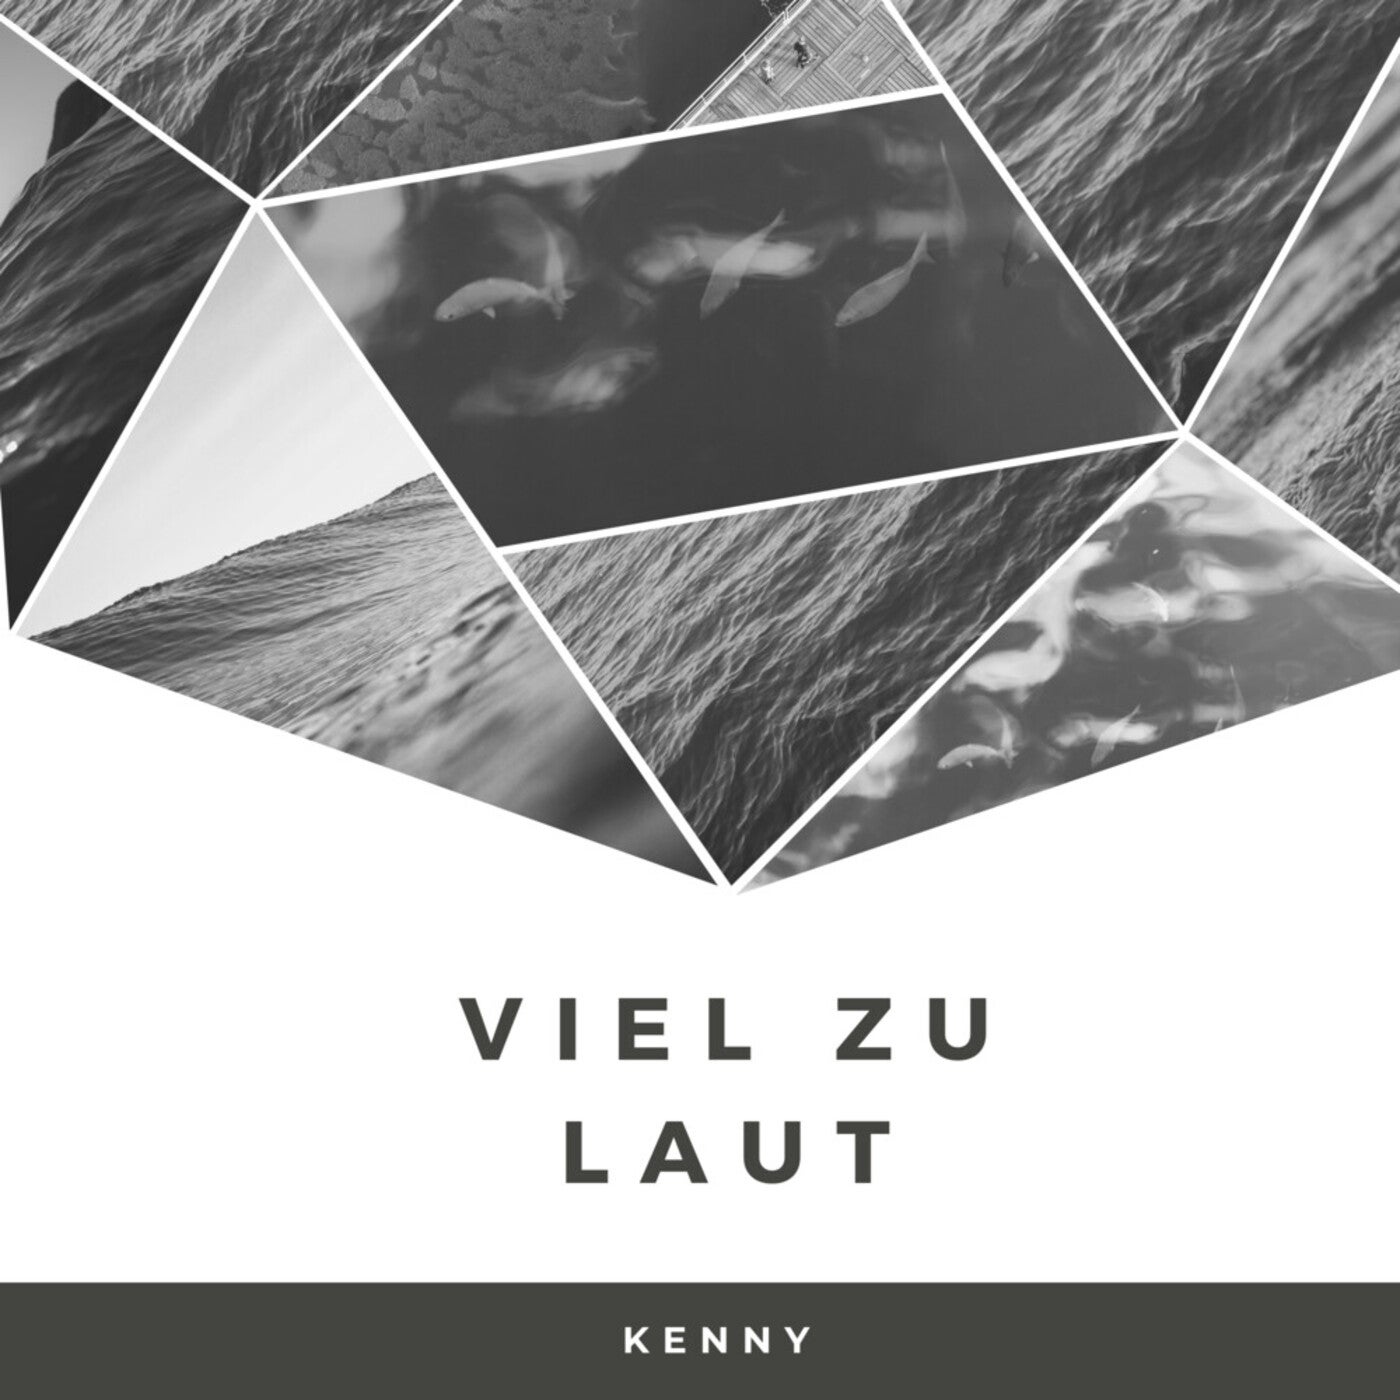 zu laut Mix) by Kenny on Beatport